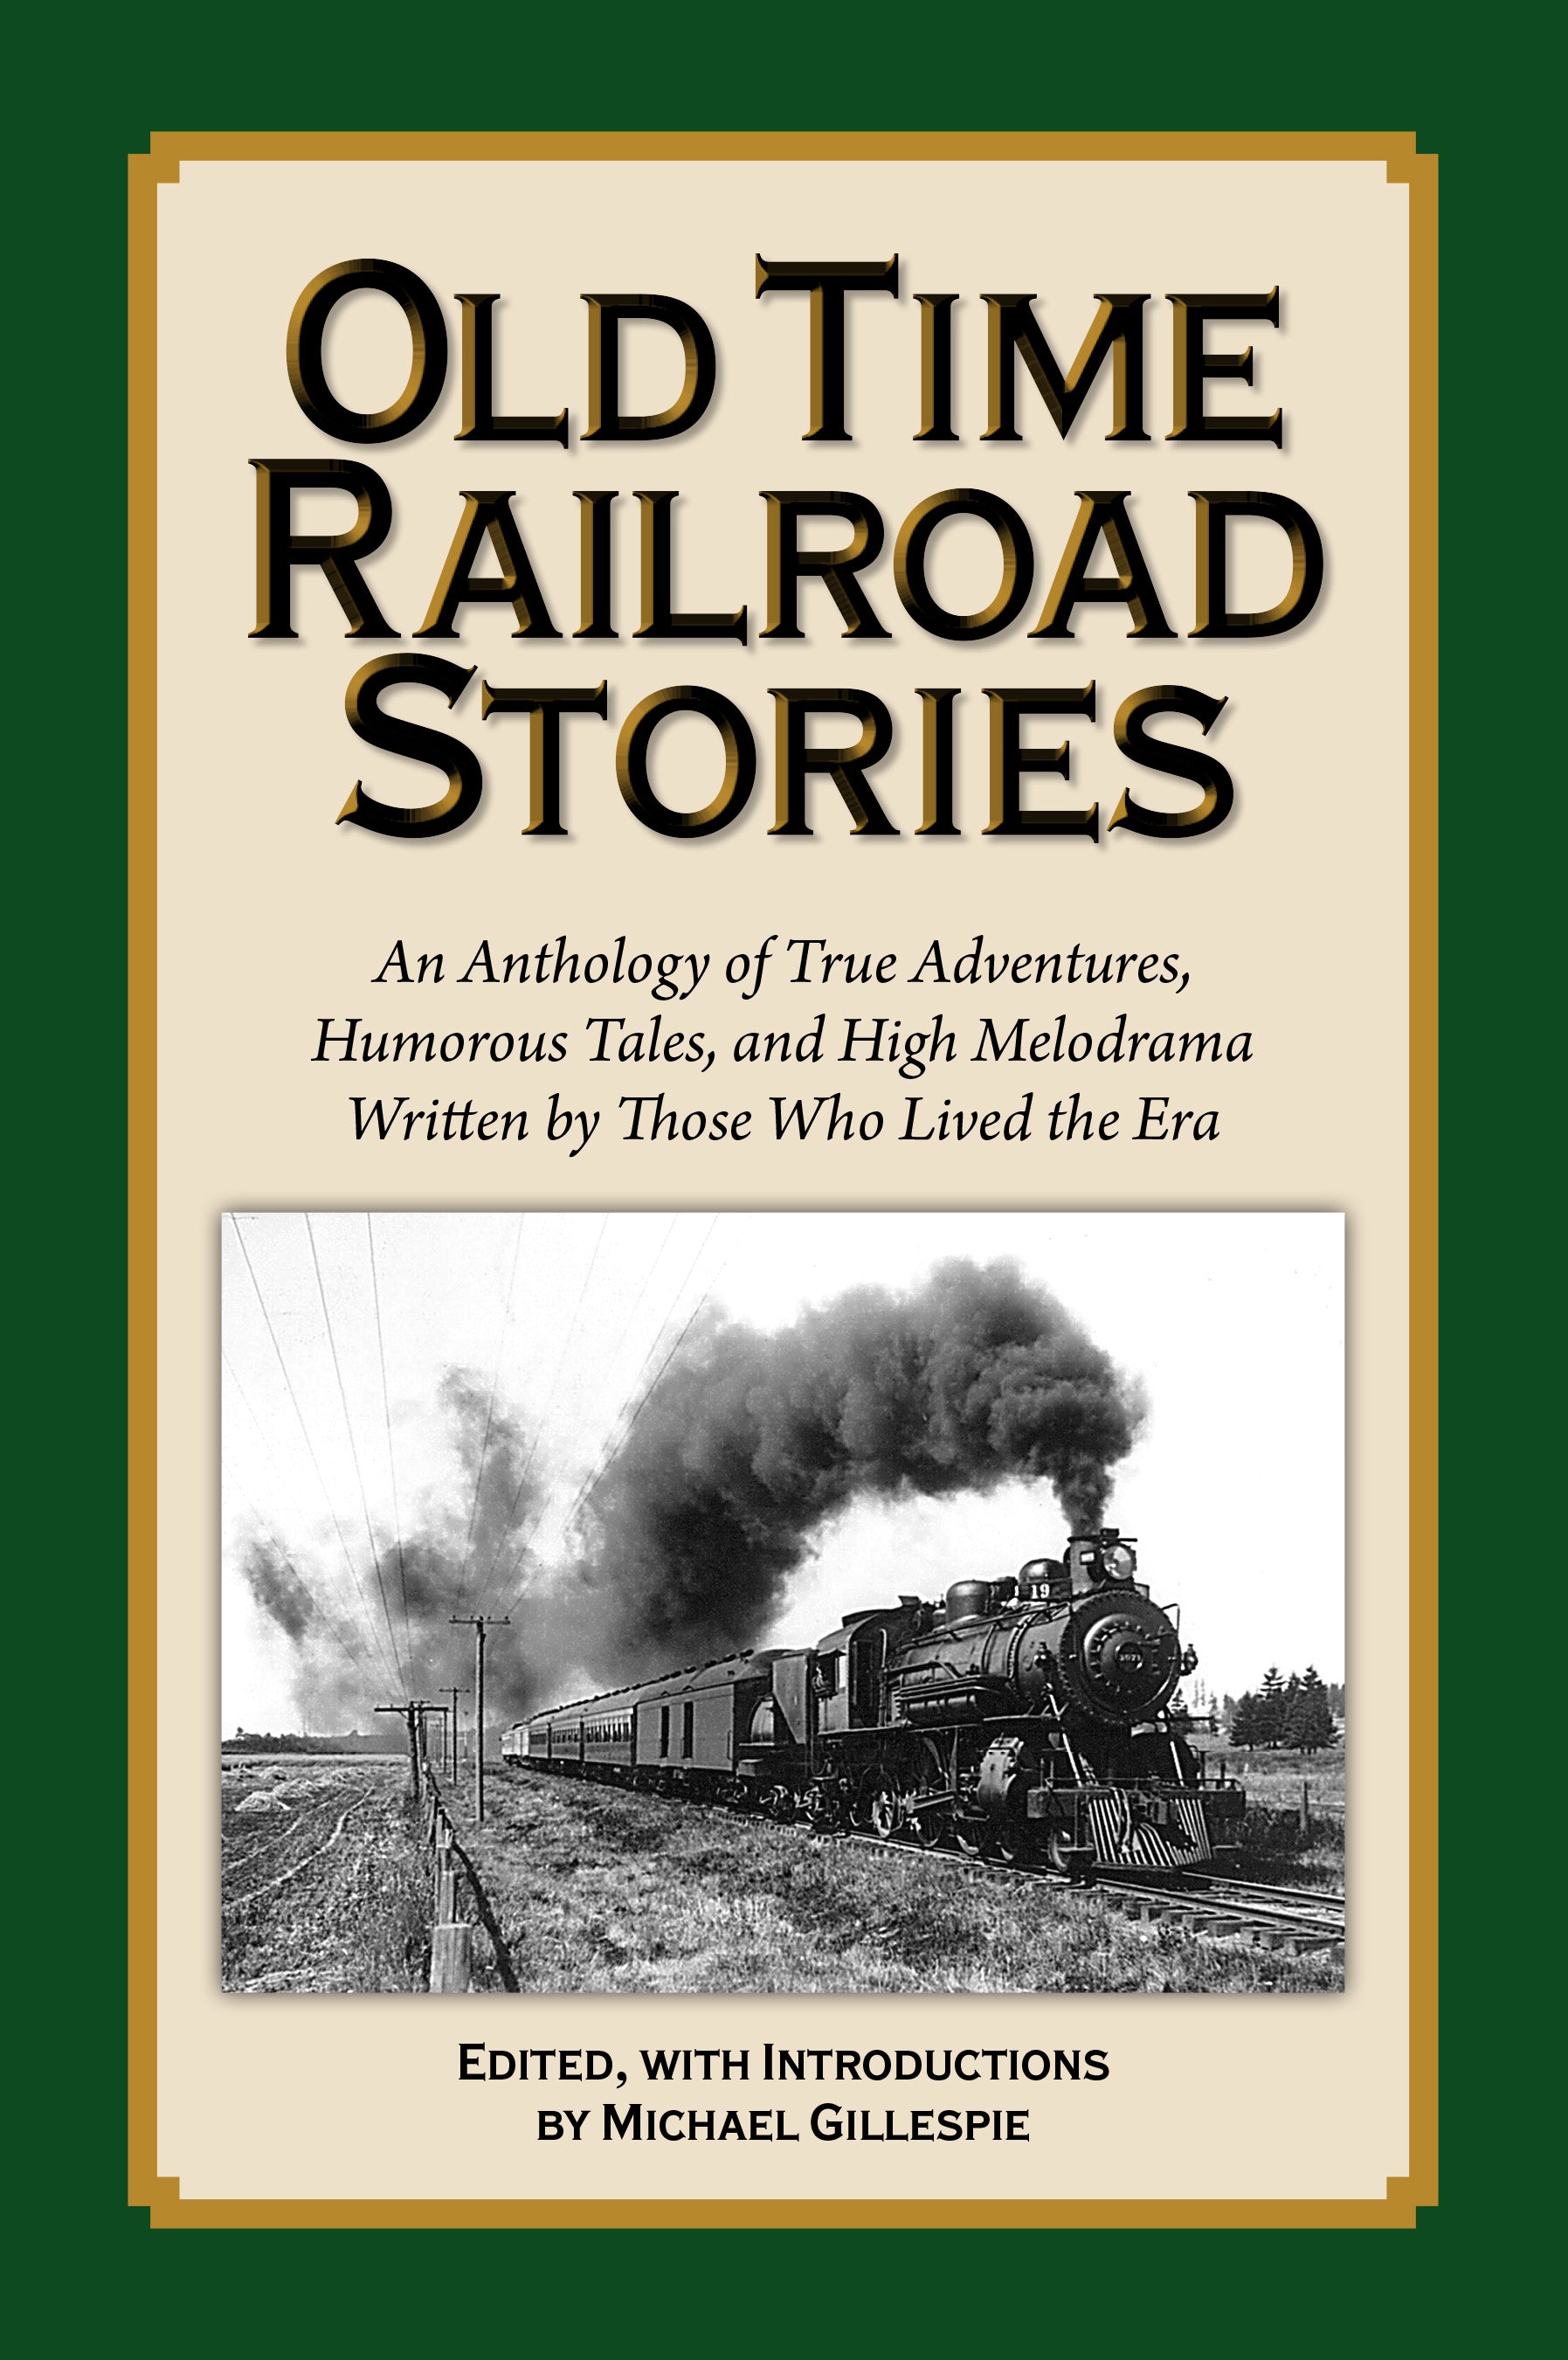 Old Time Railroad Stories by Michael Gilespie